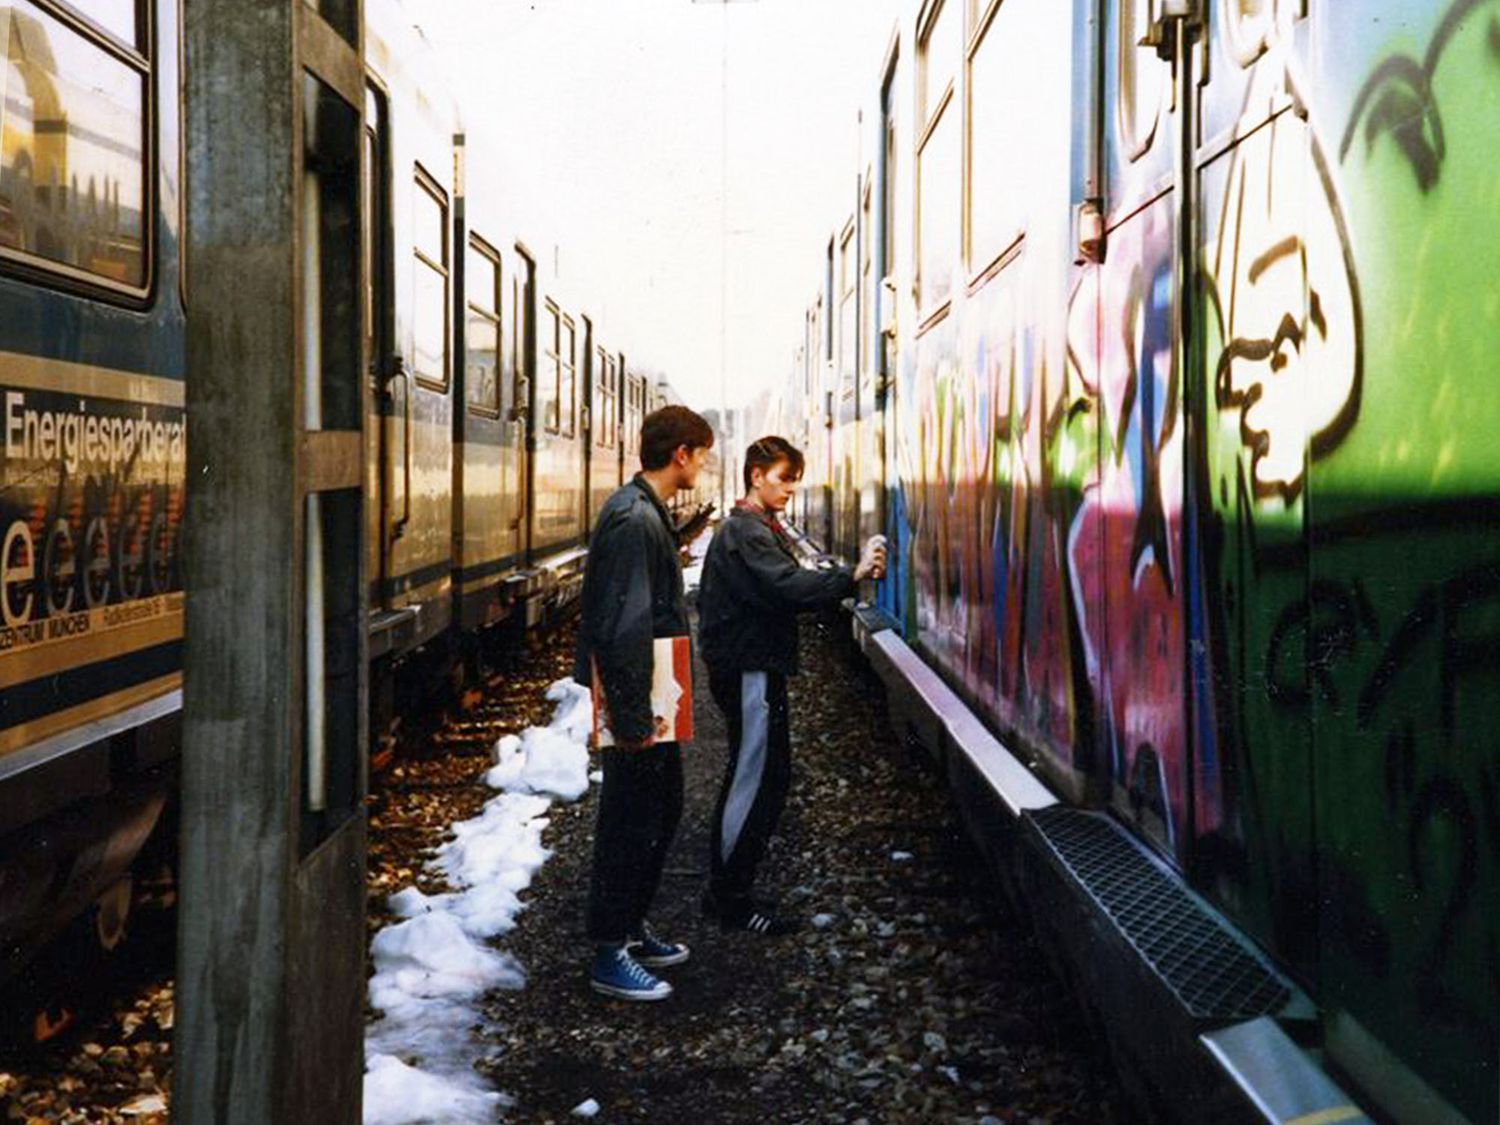 Back in 1985 with this historical picture of Blash (left) and Loomit spraying a train at the Geltendorf yard during the golden years of illegal graffiti in Berlin (©Cheech H/ From Here To Fame Publishing).